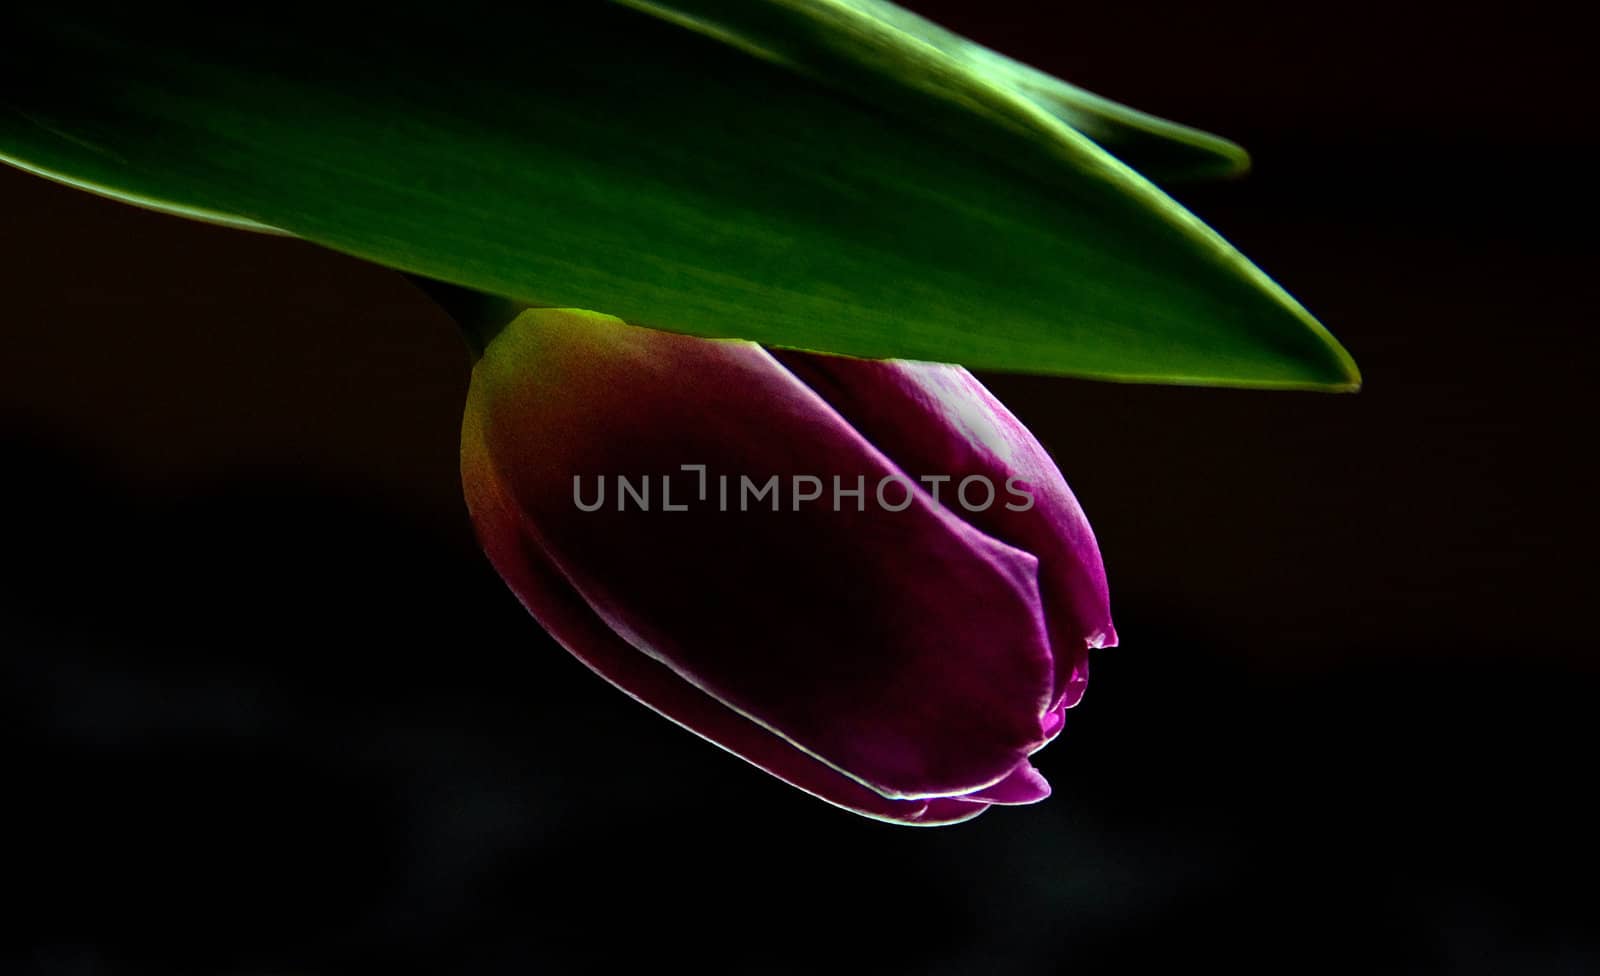 Lilac tulip by GryT